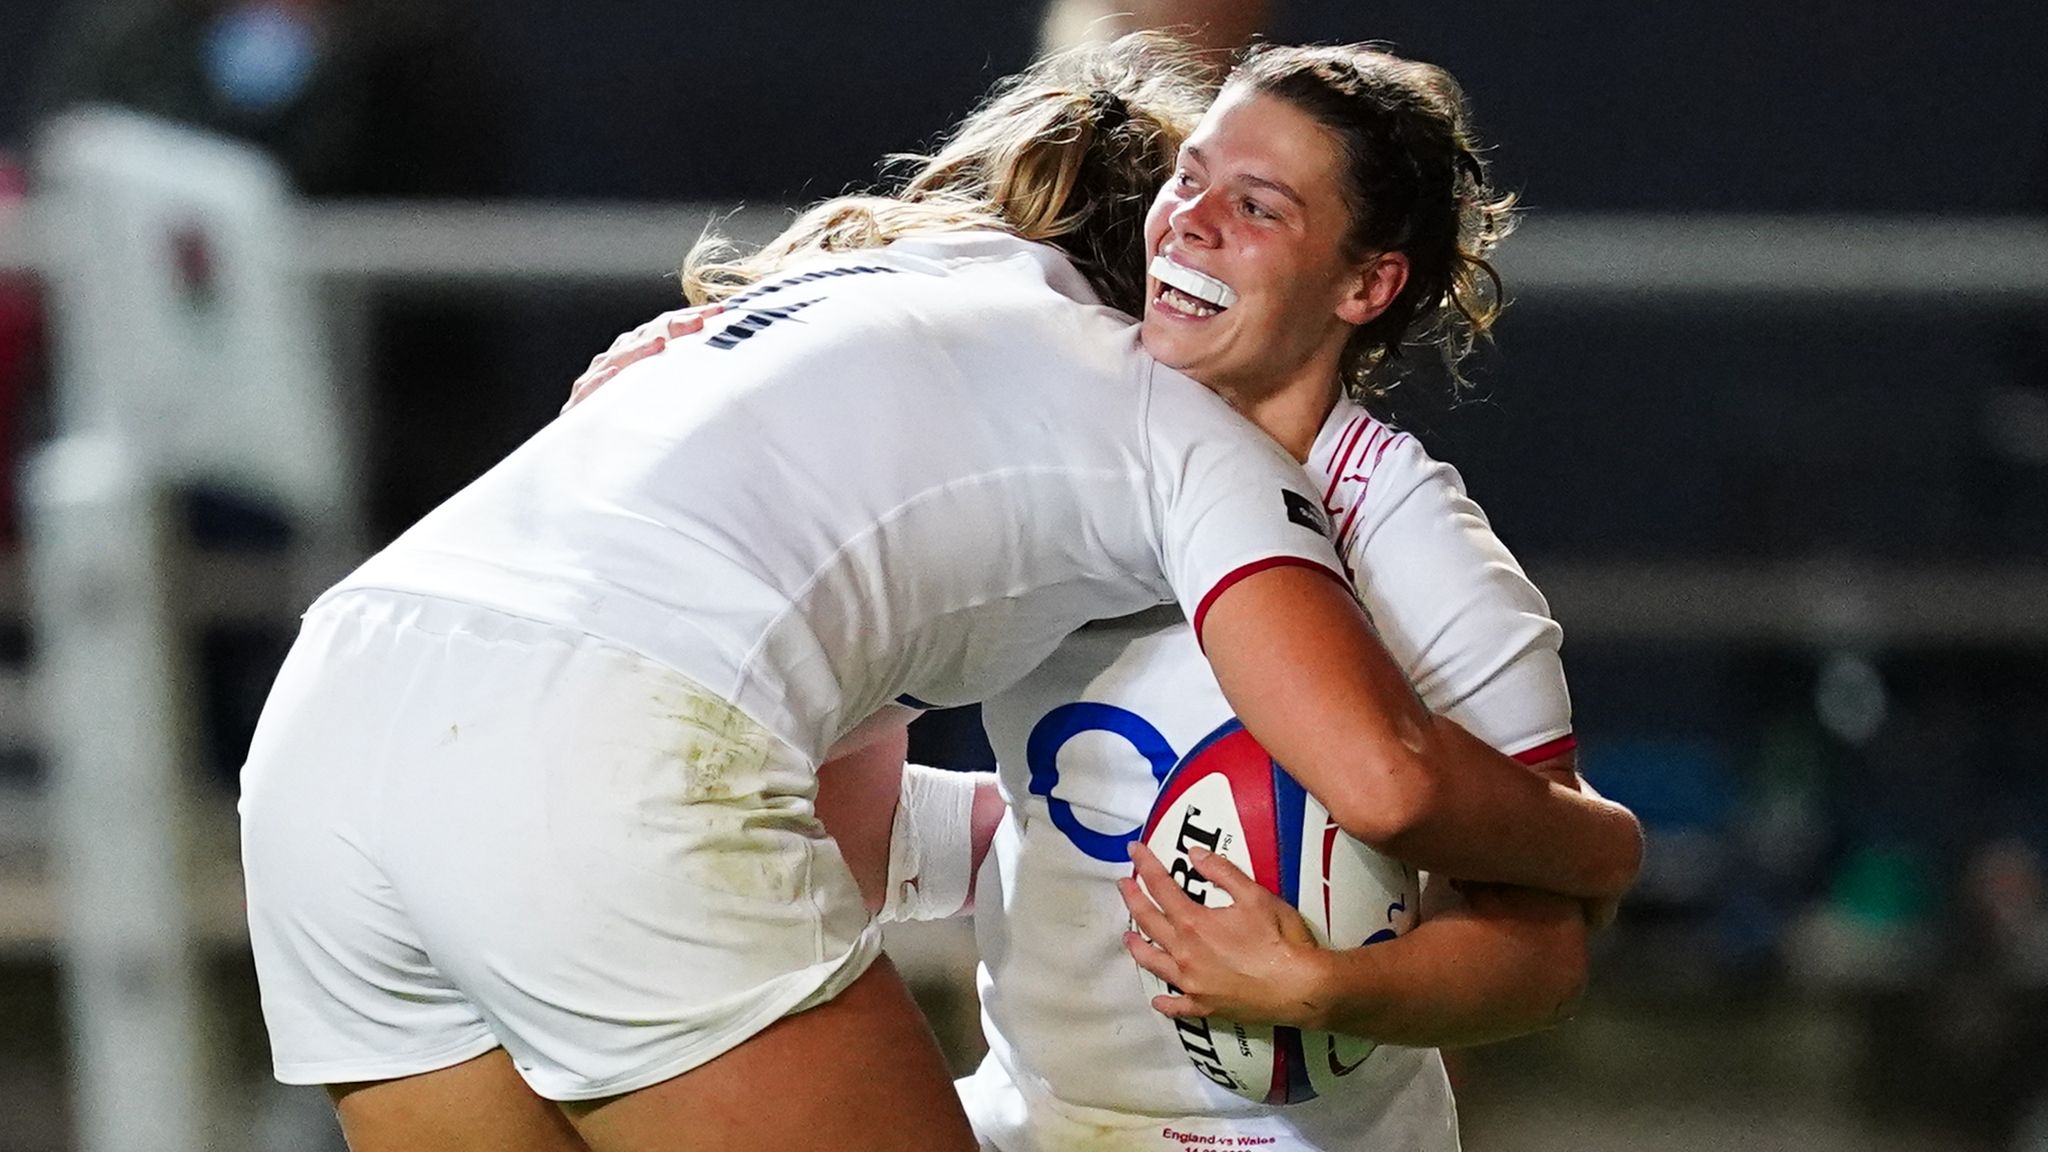 England Women 73-7 Wales Women Helena Rowland scores hat-trick as Red Roses complete record 25th Test win in a row Rugby Union News Sky Sports